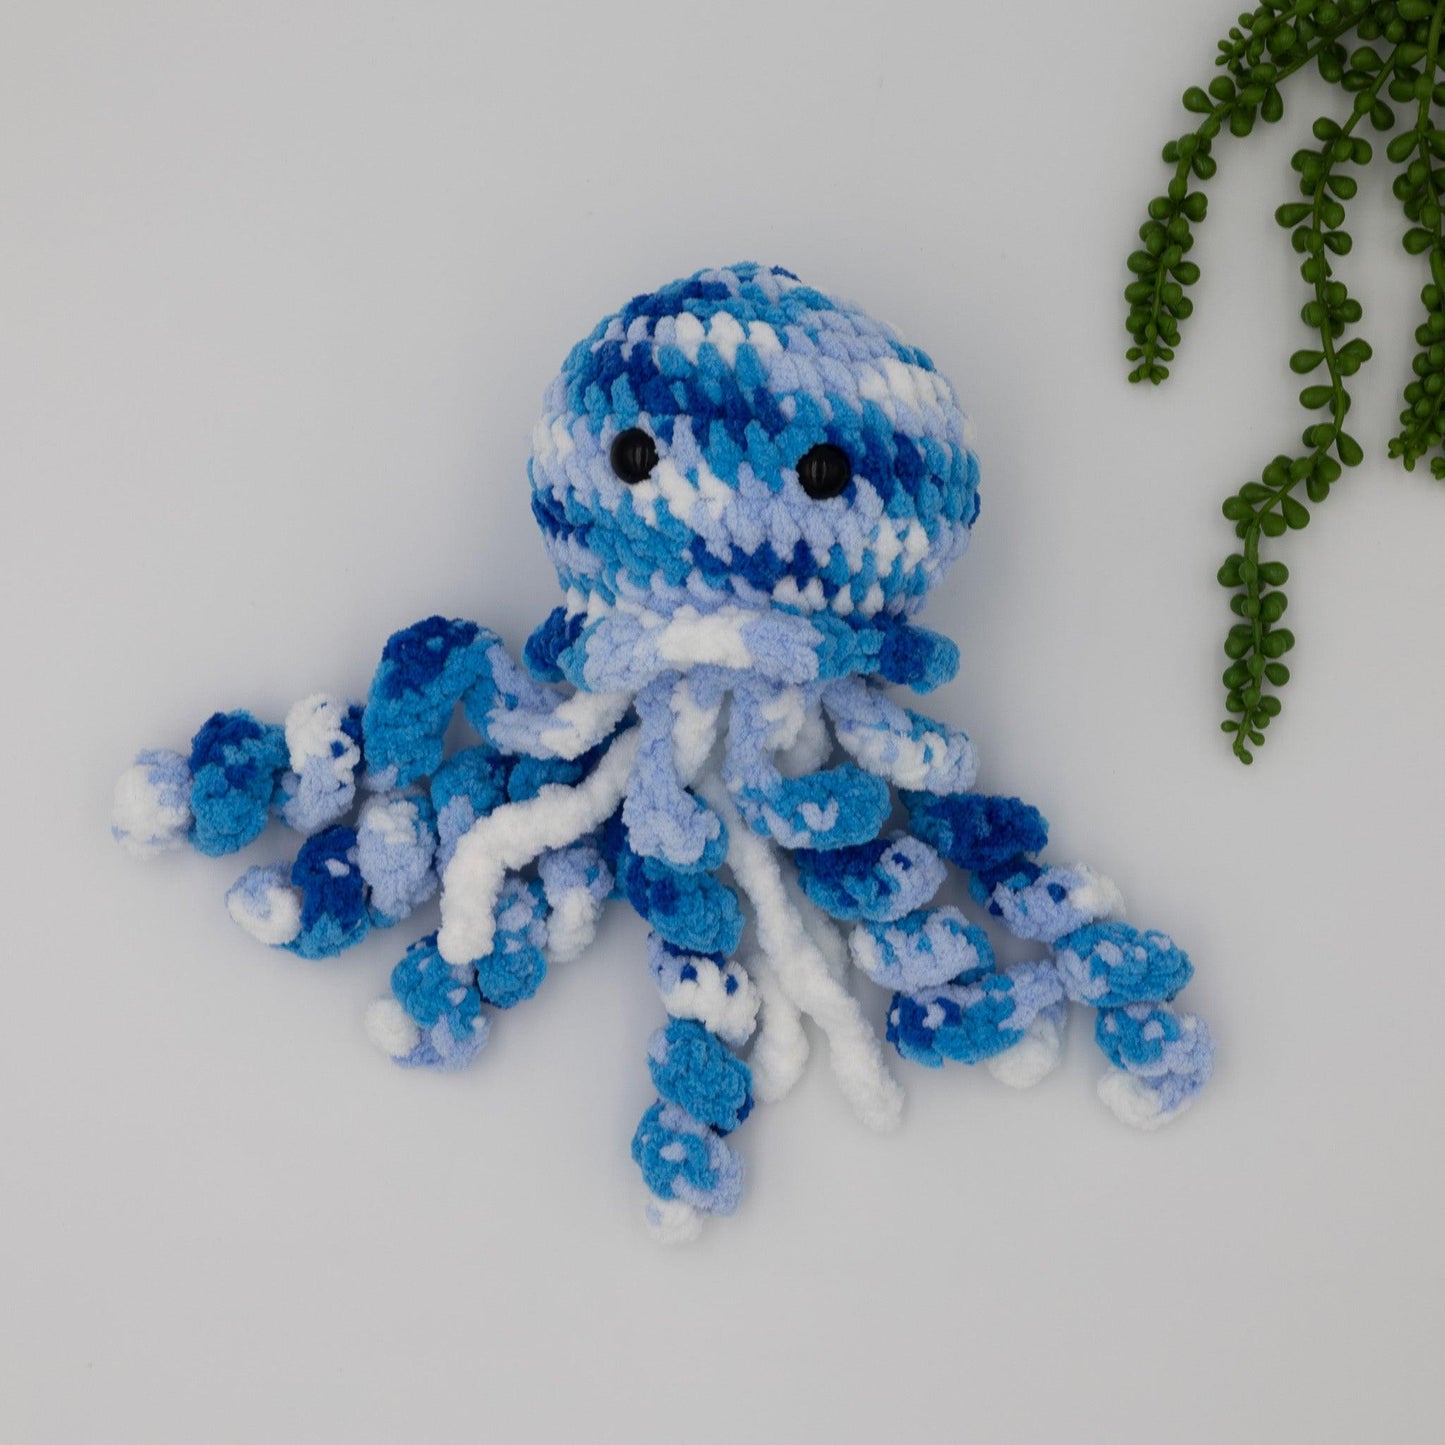 4Stitches Designs 14 Inch Crochet Jellyfish - Hand-Made Stuffed Animal Gift for Kids